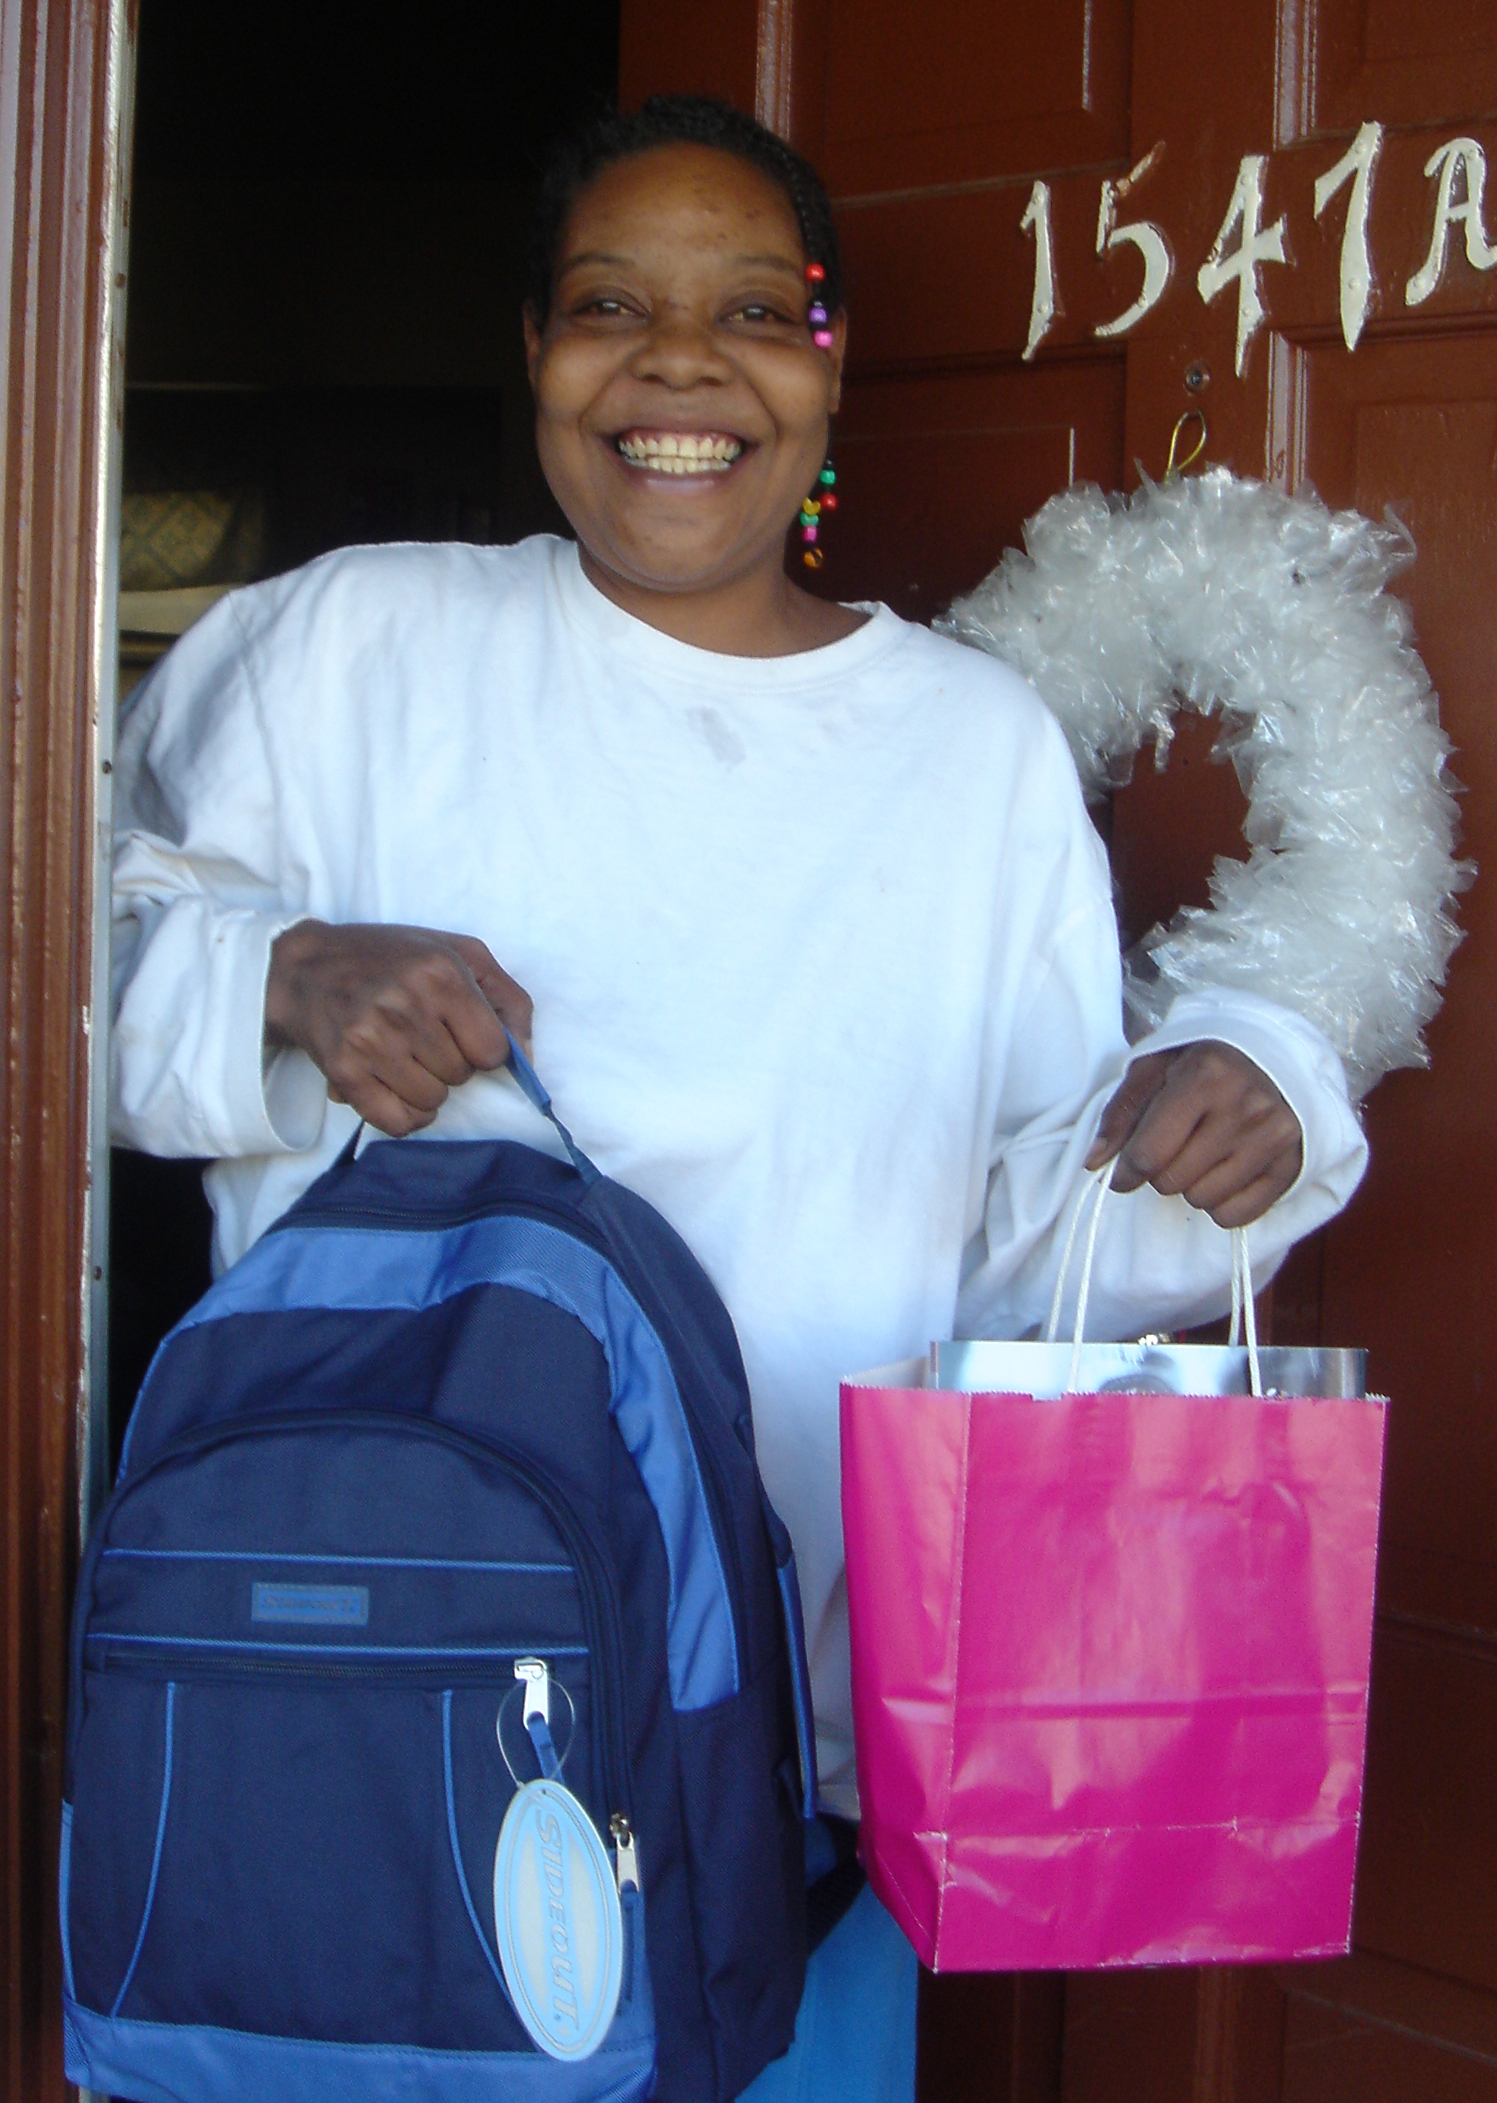 Smiles from this Mom at the front door, when gifts arrived unexpectedly